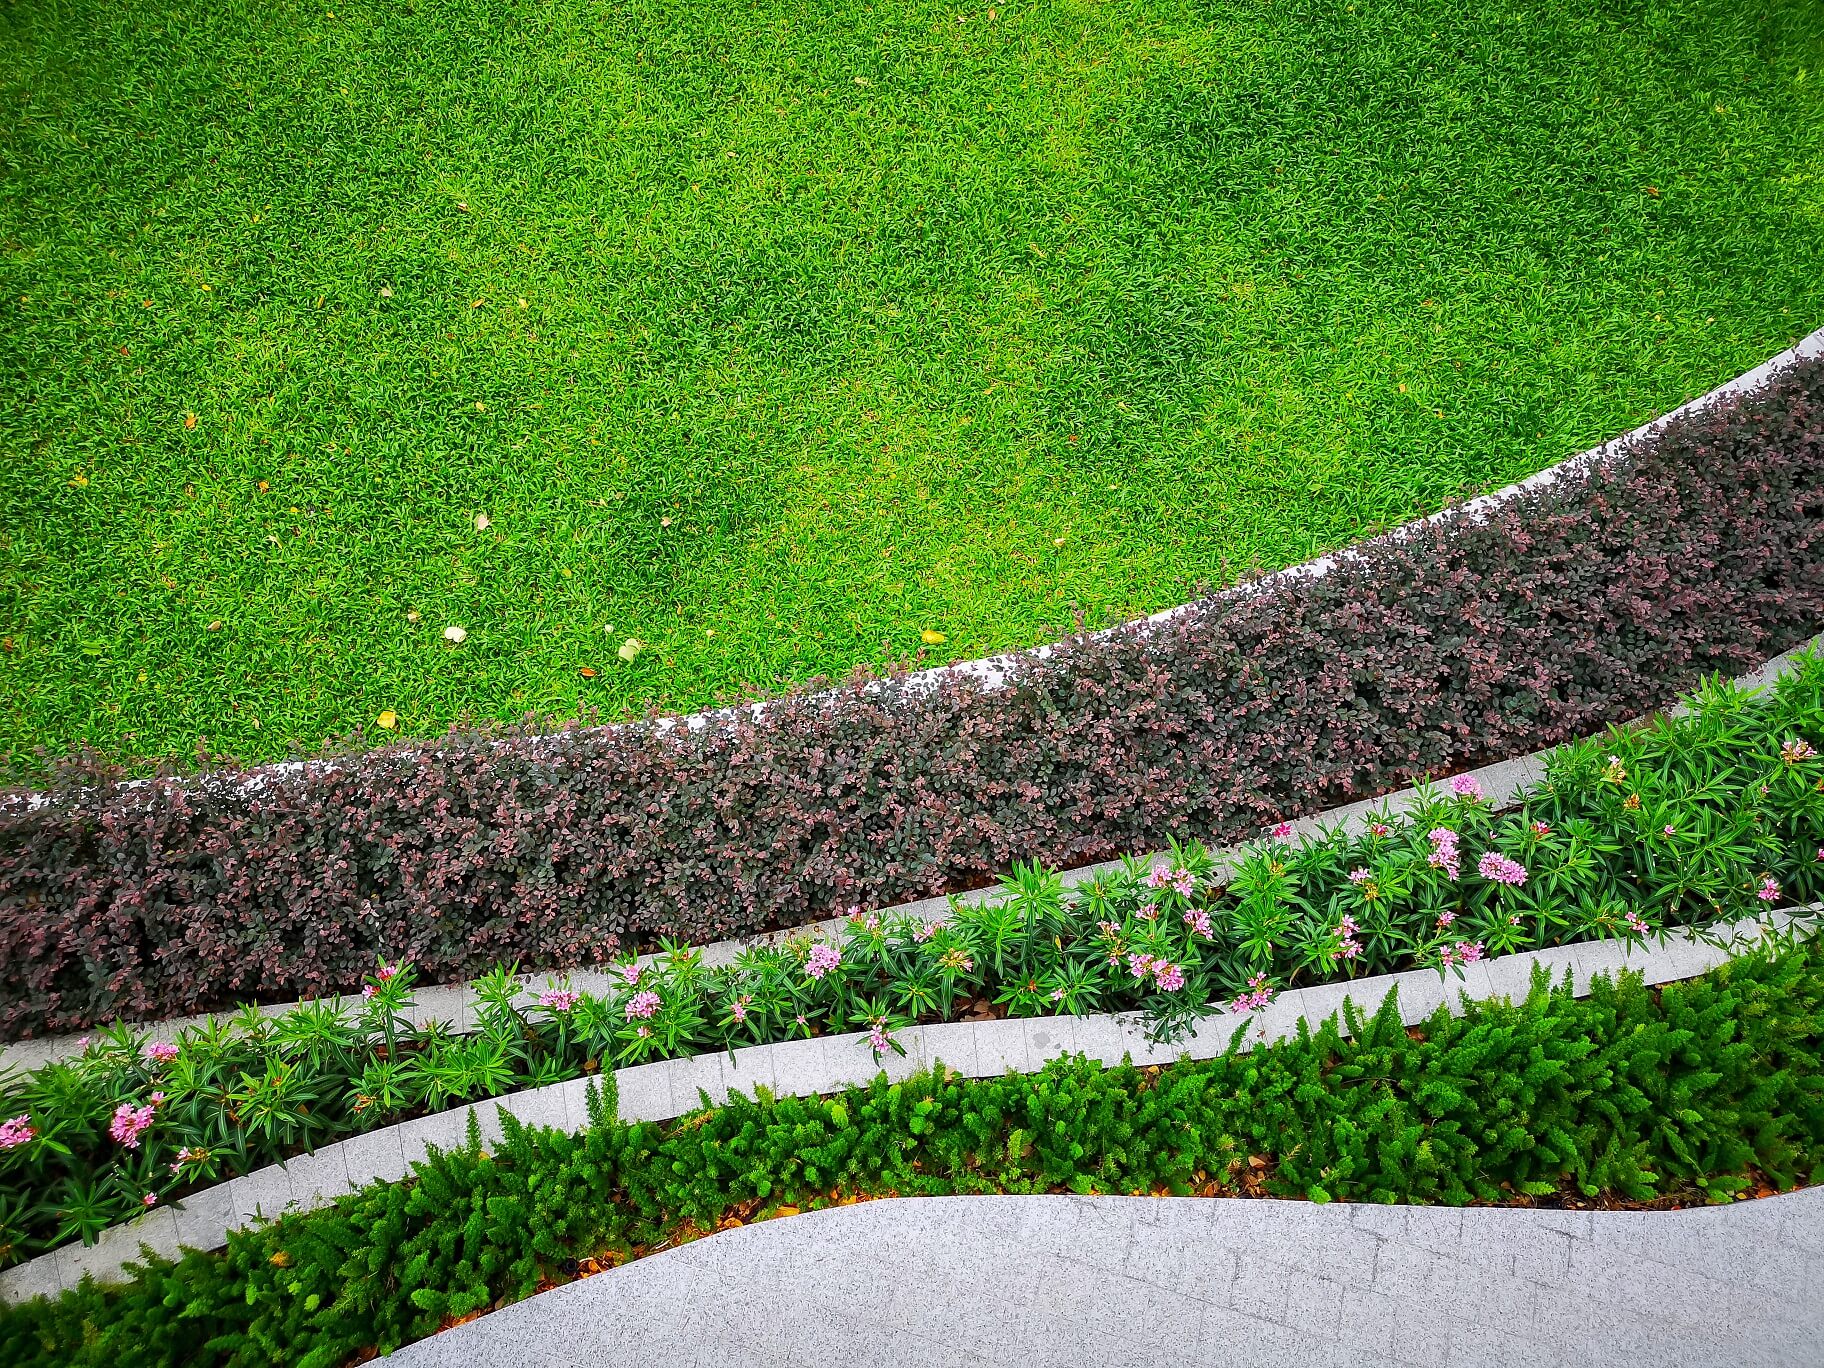 A photo of a beautiful sloped garden